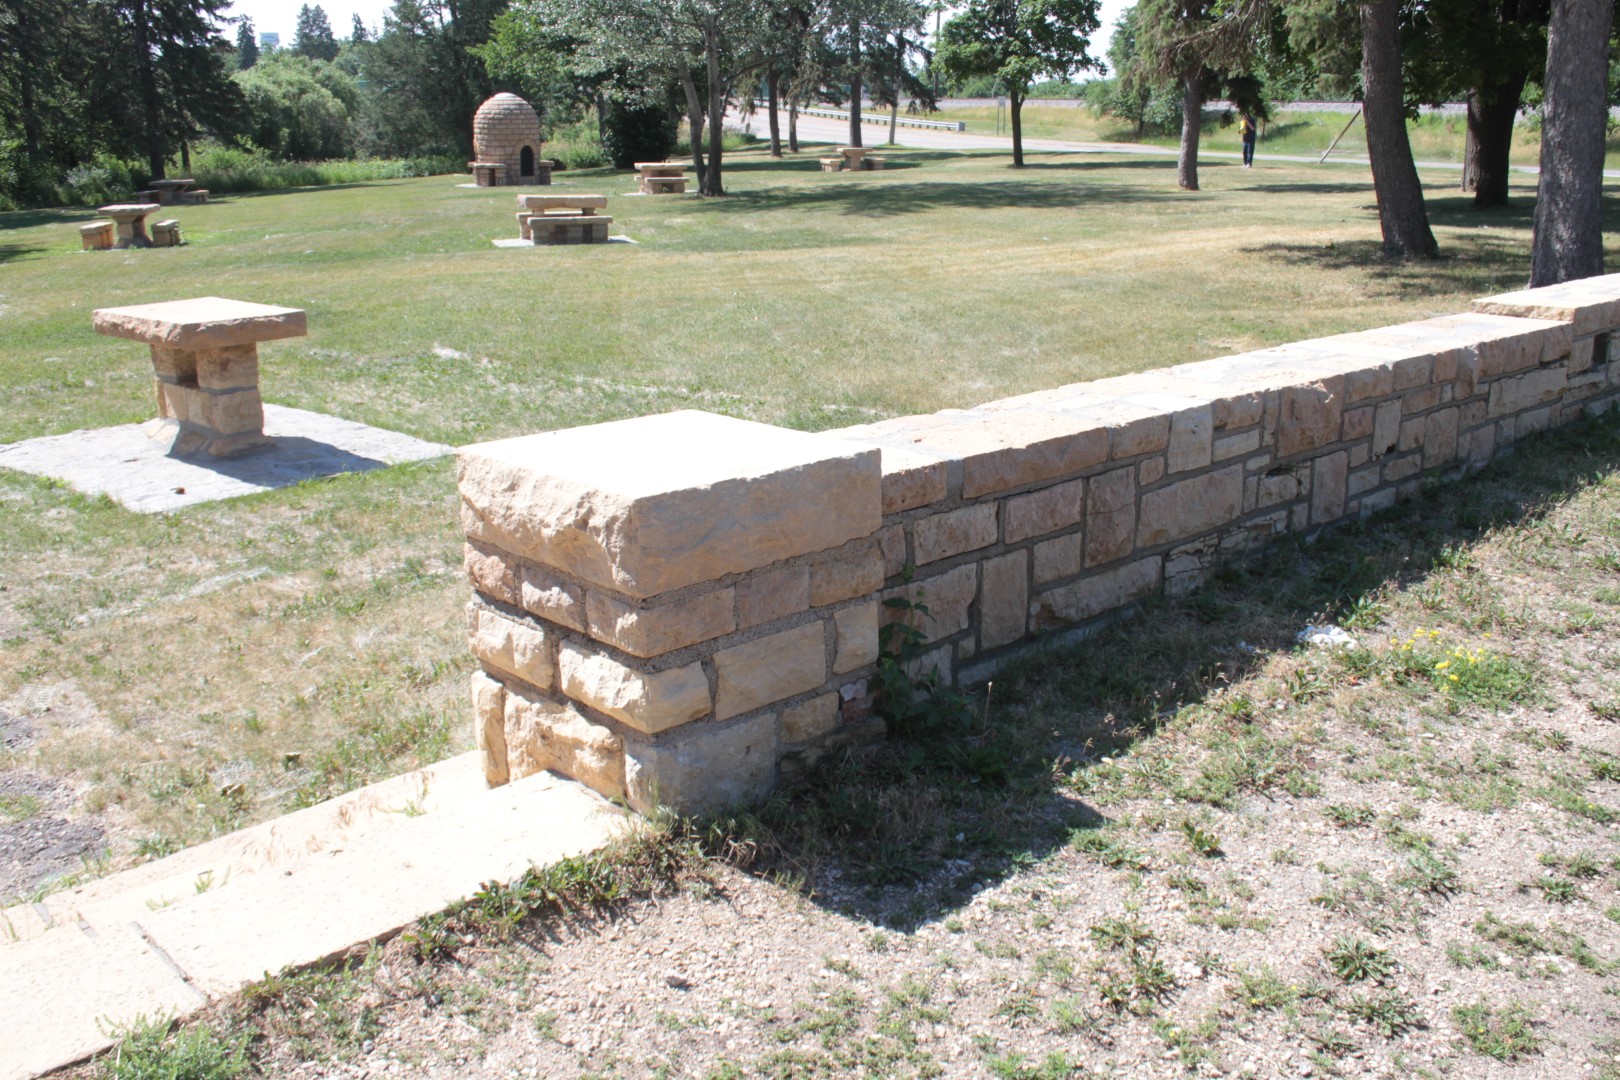 low stone wall with opening and a few steps into a grass picnic area with stone picnic tables and the “beehive” fireplace